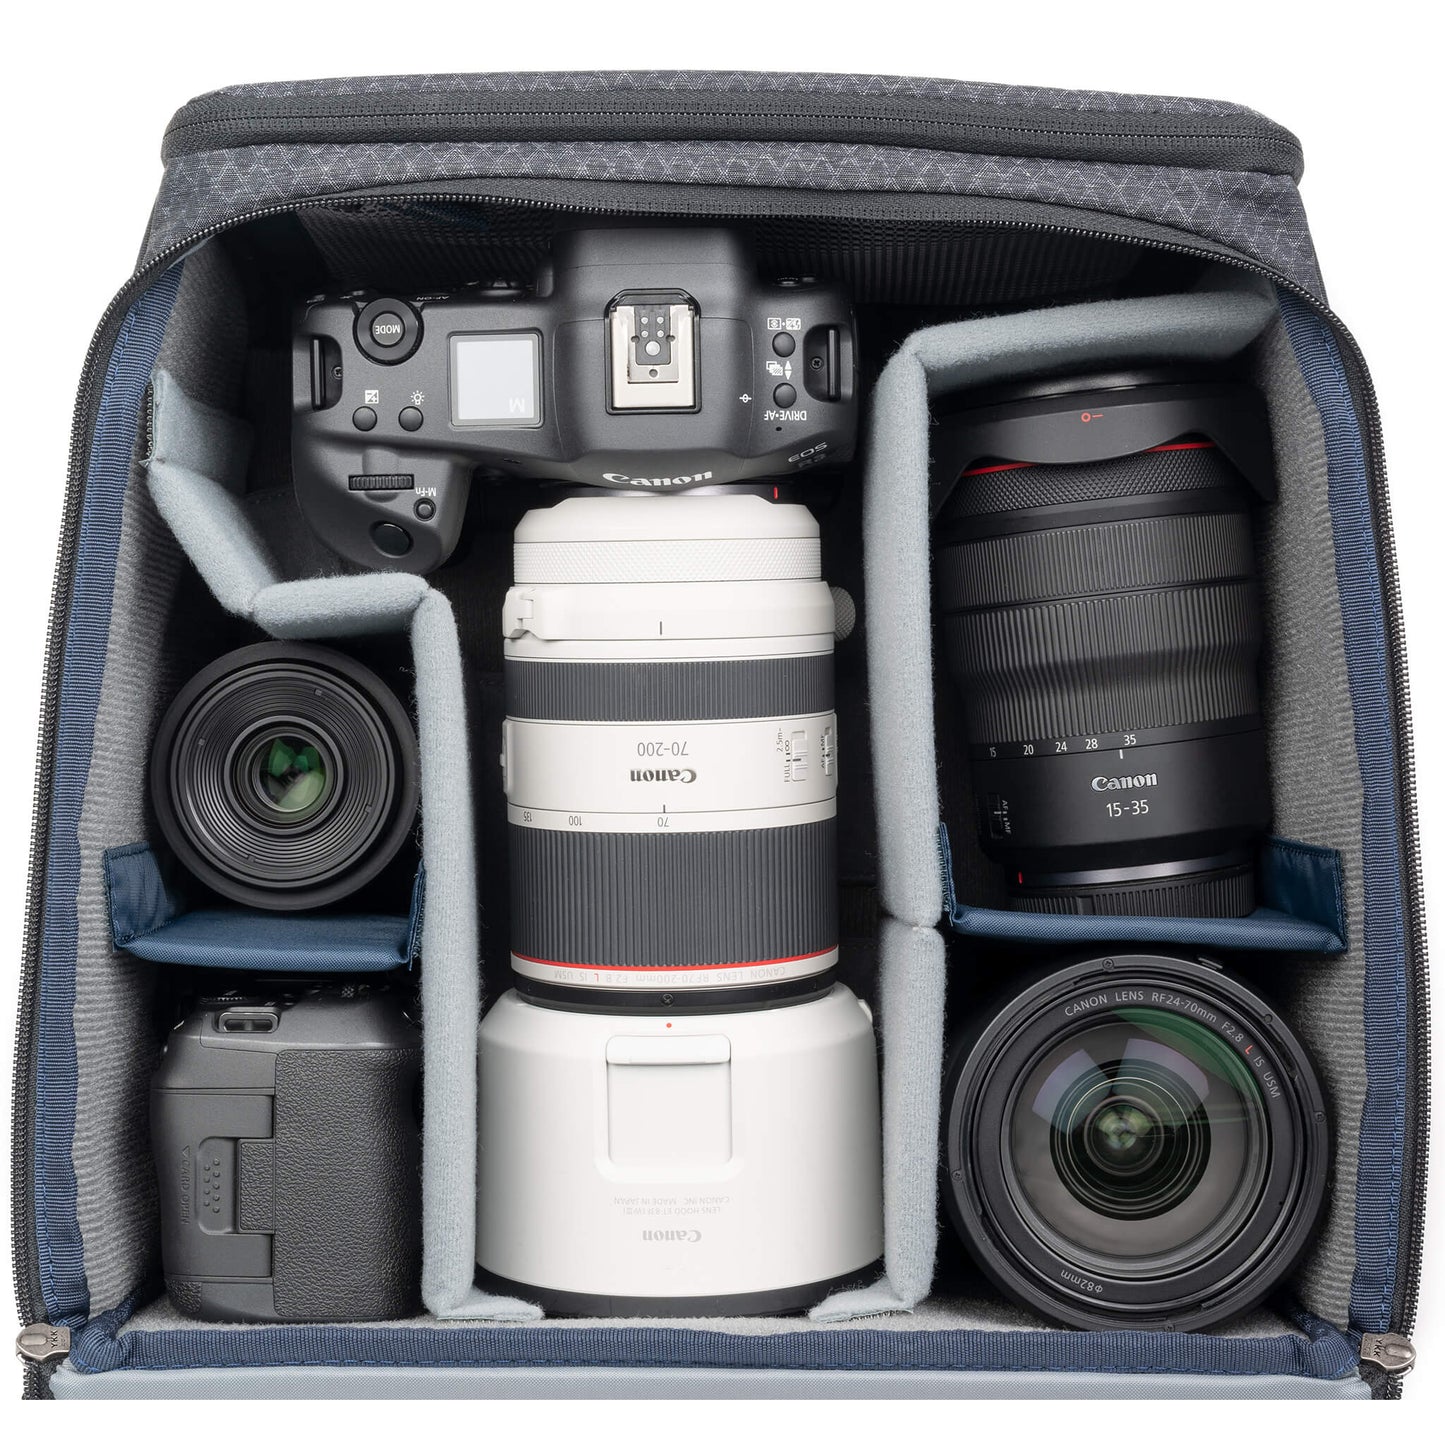 
                  
                    Stash-Master-L-Pro - Canon R3  70-200mm f/2.8 Hood Extended - 15-35mm f/2.8 - 35mm f/1.8 - 24-70mm f/2.8 - Canon R5 - Battery Charger
                  
                